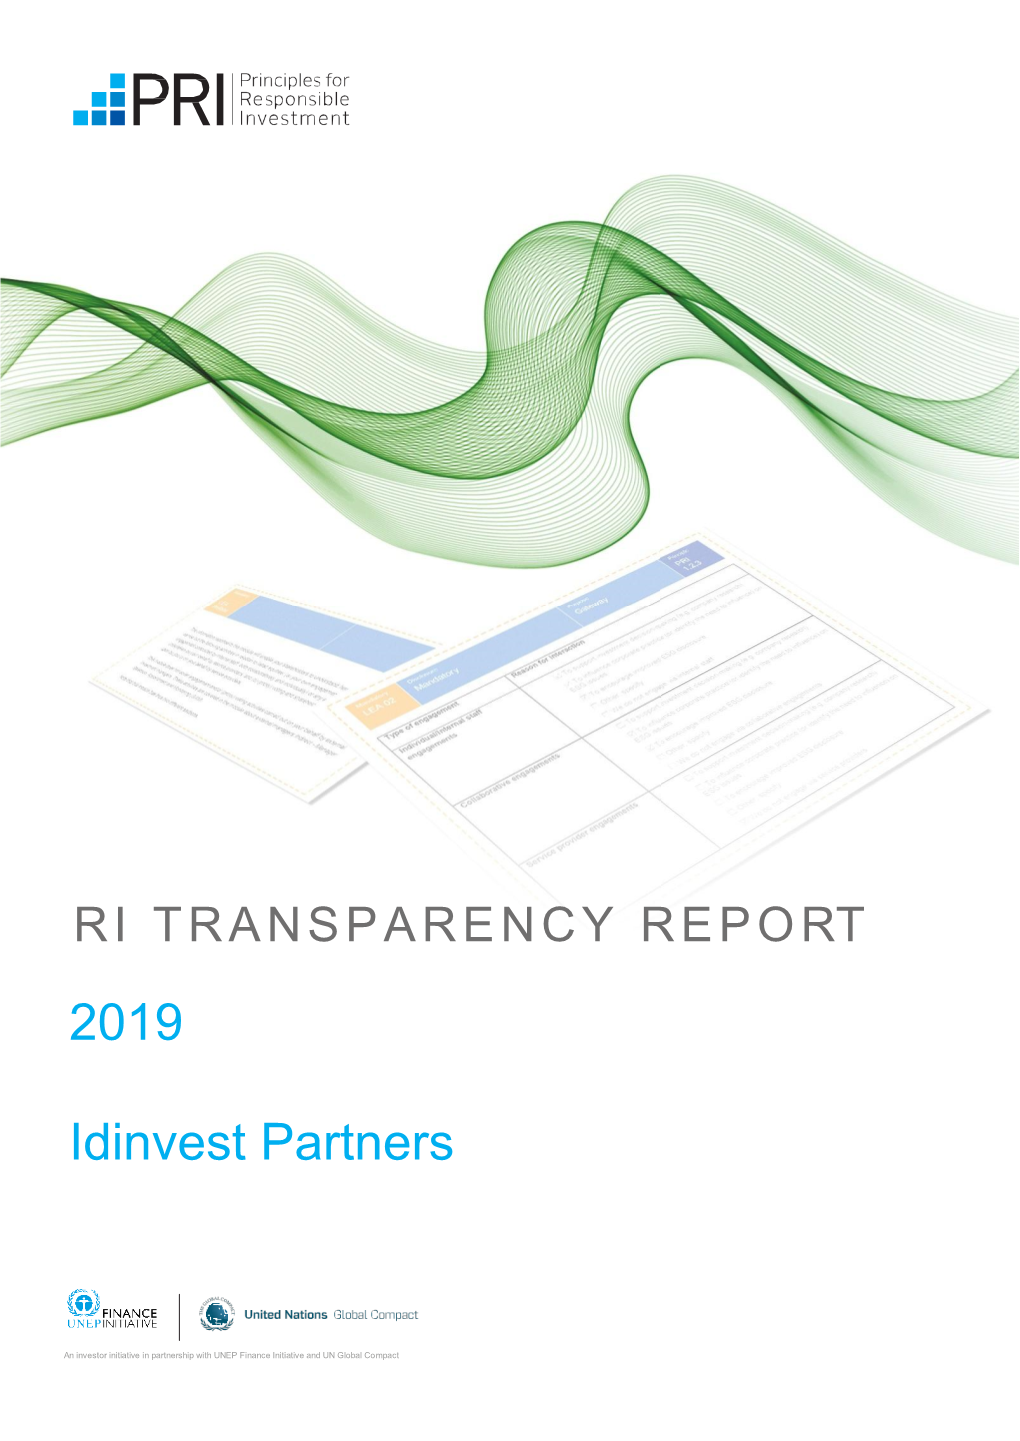 RI Transparency Report Is One of the Key Outputs of This Framework